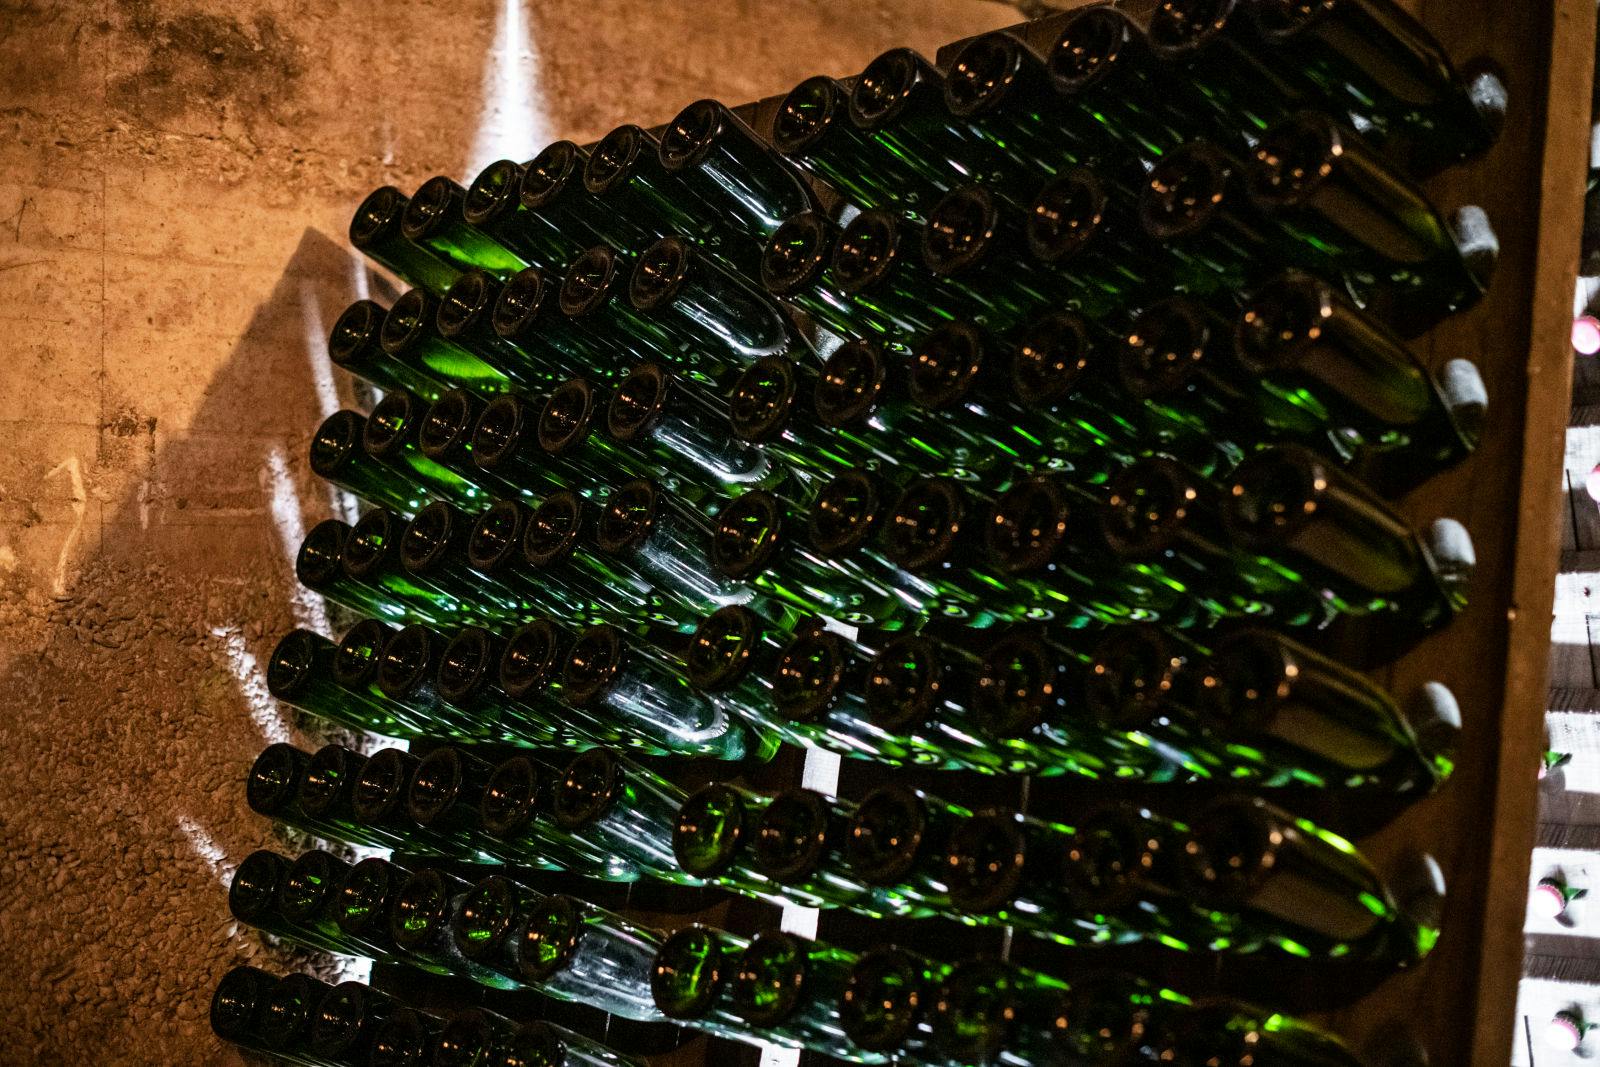 The Champagne Carbon For Bugatti collection is composed only of "vintage" wines.
